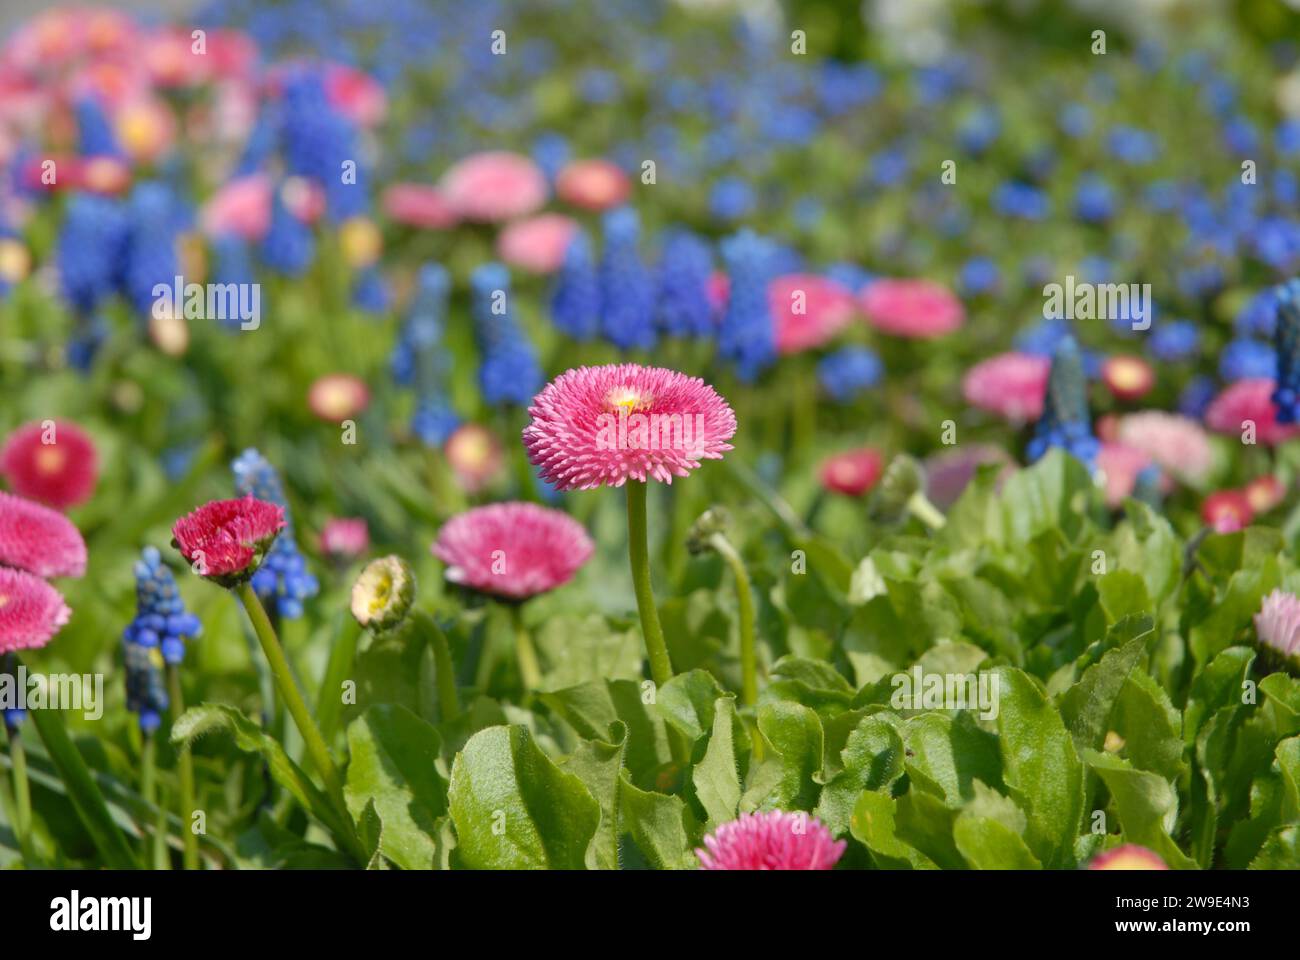 Flowerbed in Spring, selective focus on common English daisy, bellis perennis with daisies and Muscari aucheri, Blue Magic Stock Photo